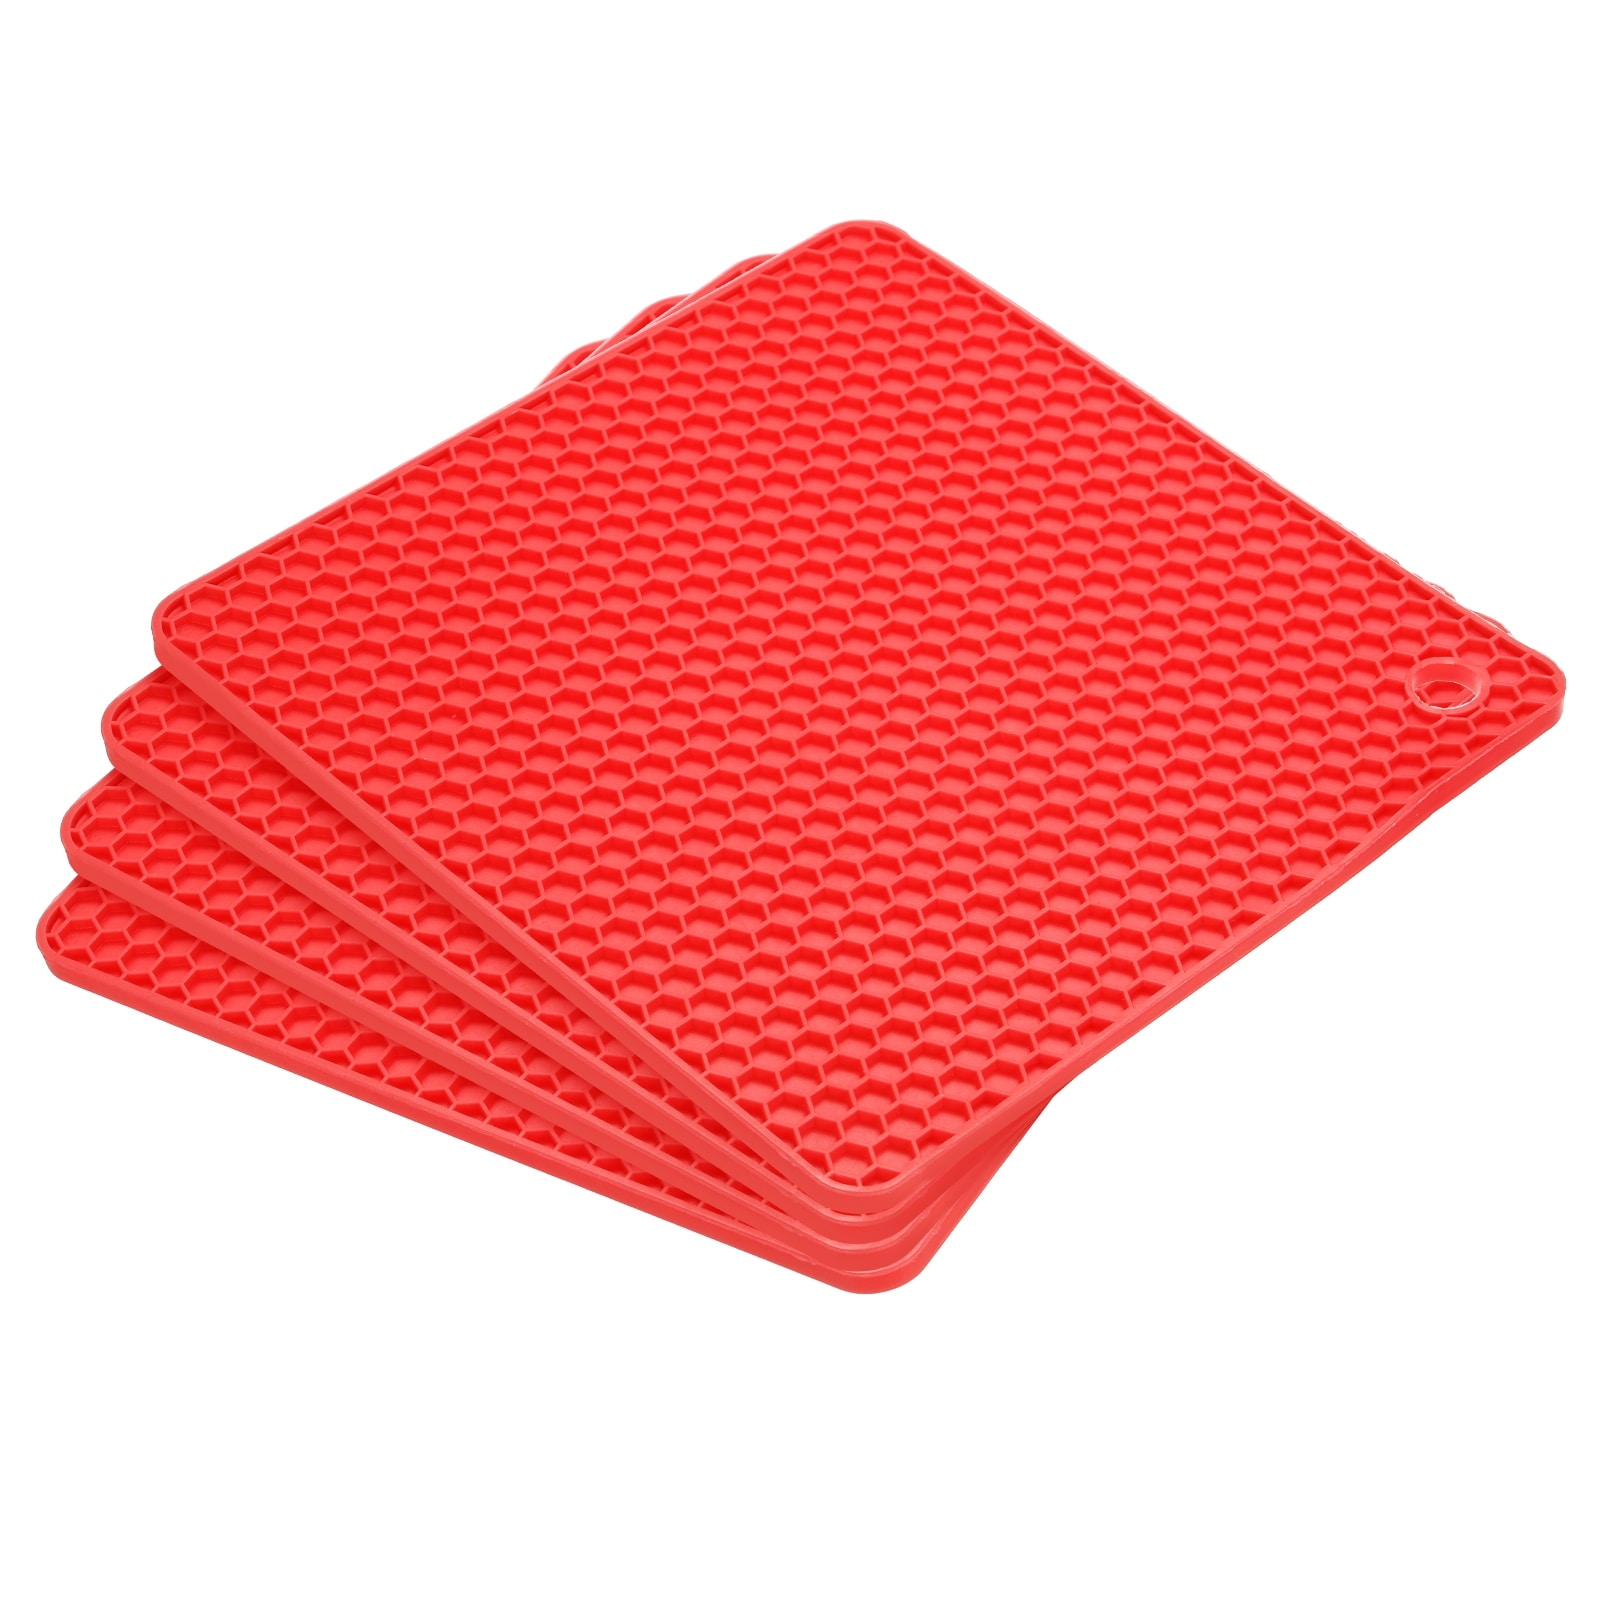 https://ak1.ostkcdn.com/images/products/is/images/direct/045658b5cf2be2167f114e77dda3315d95802b73/Silicone-Trivet-Mats-4pcs%2C-Hot-Pads-Pot-Holder-for-Countertop-Red.jpg